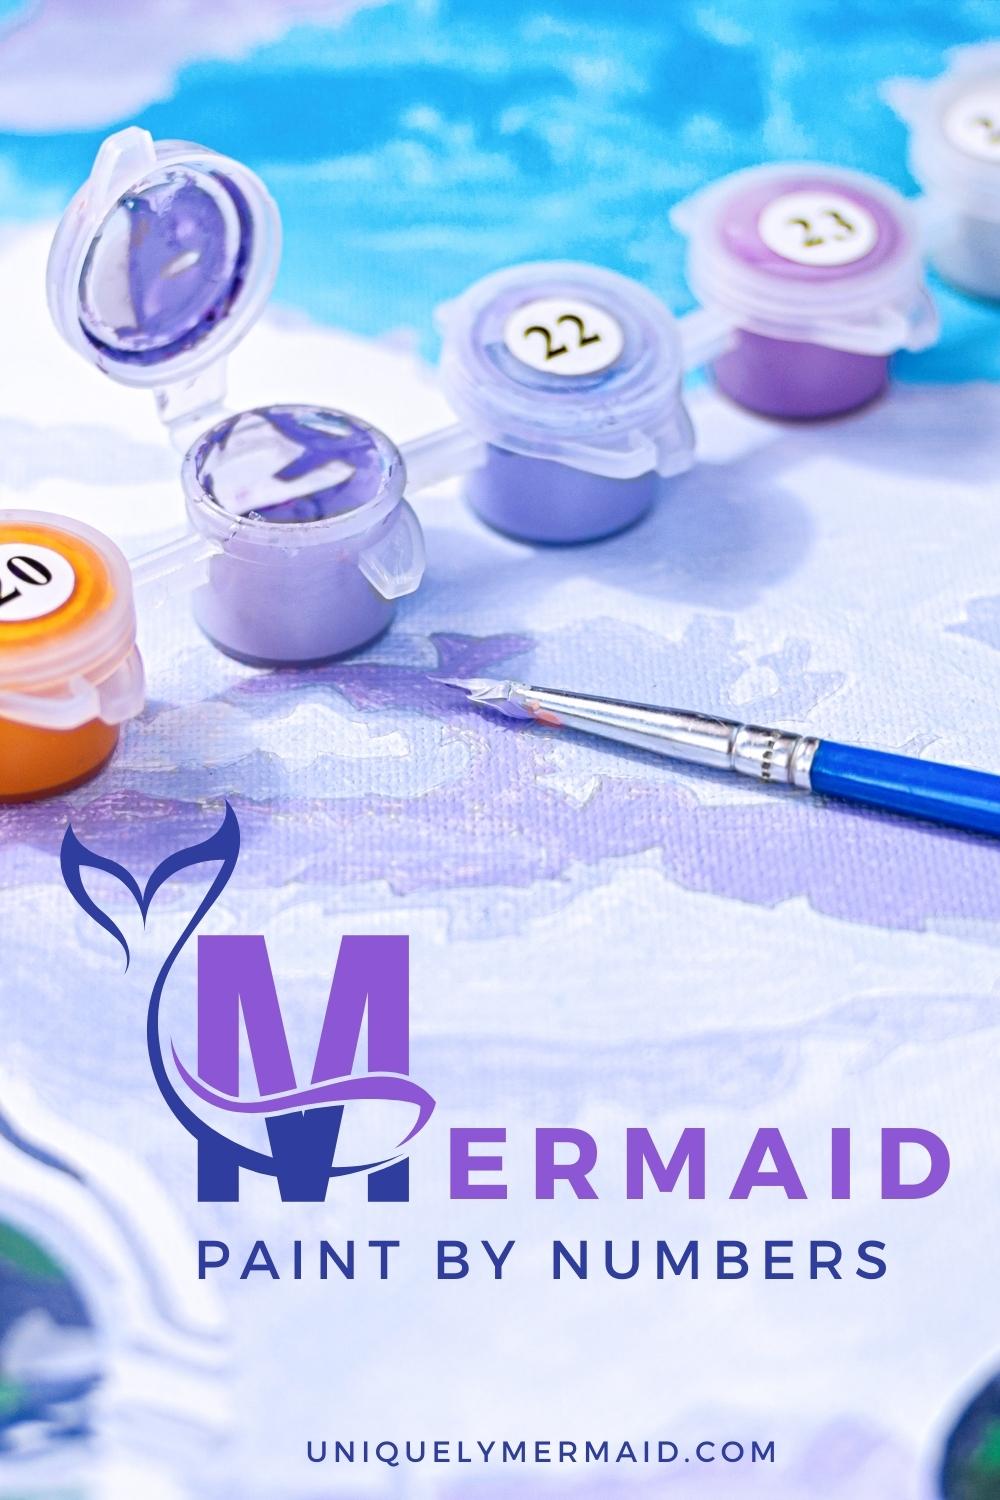 If your not quite as good as Monet just yet, these mermaid paint by numbers kits will bring out the artist in you!